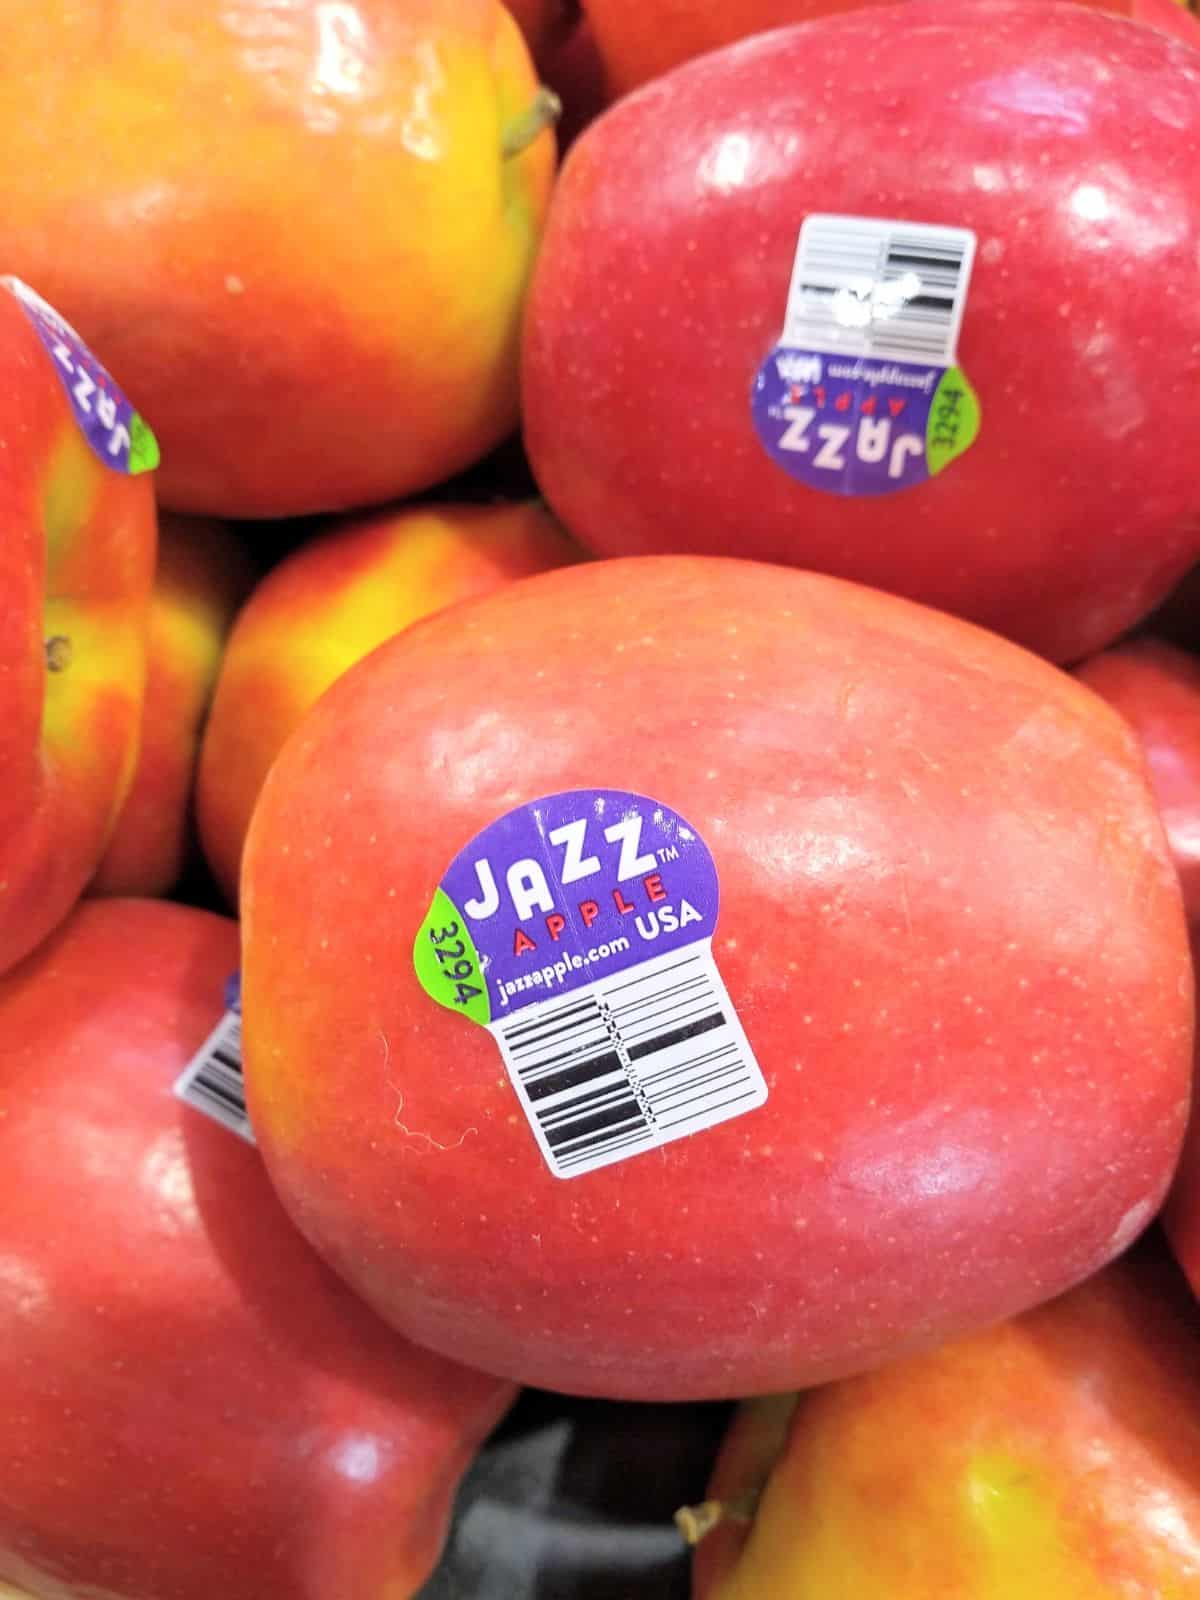 A display of Jazz apples at the store